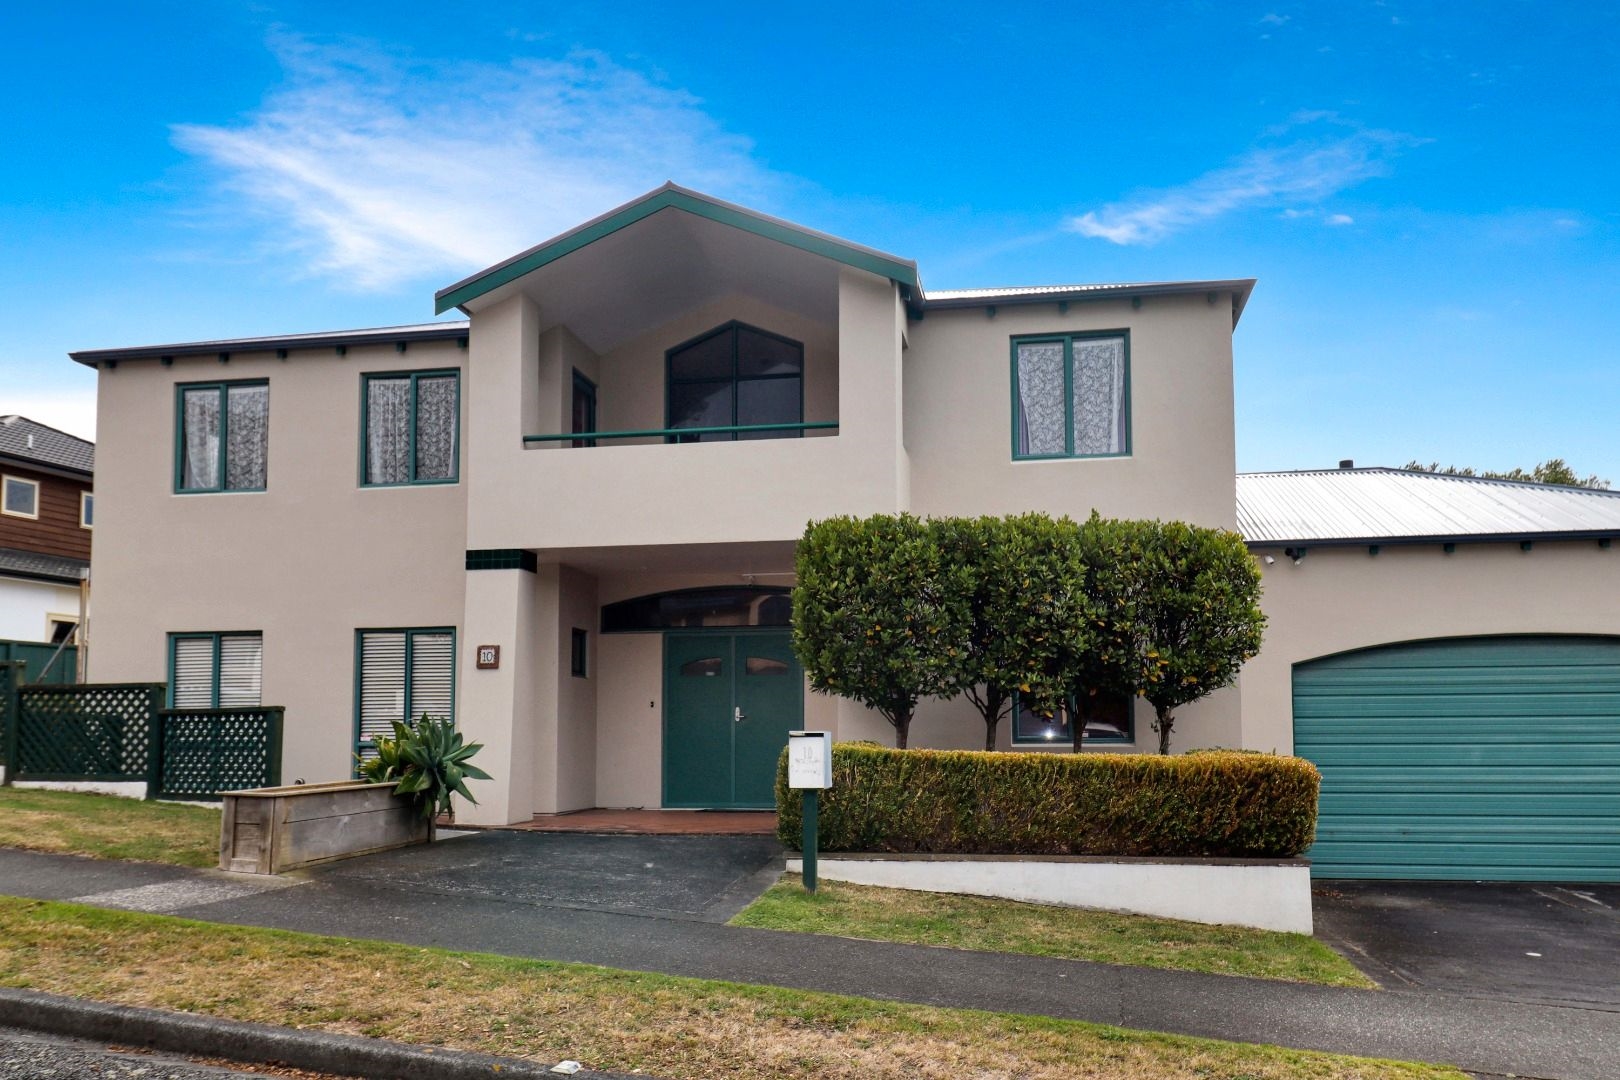 Real Estate For Rent Houses & Apartments : Looking for a house with Space - Welcome to Churton Park